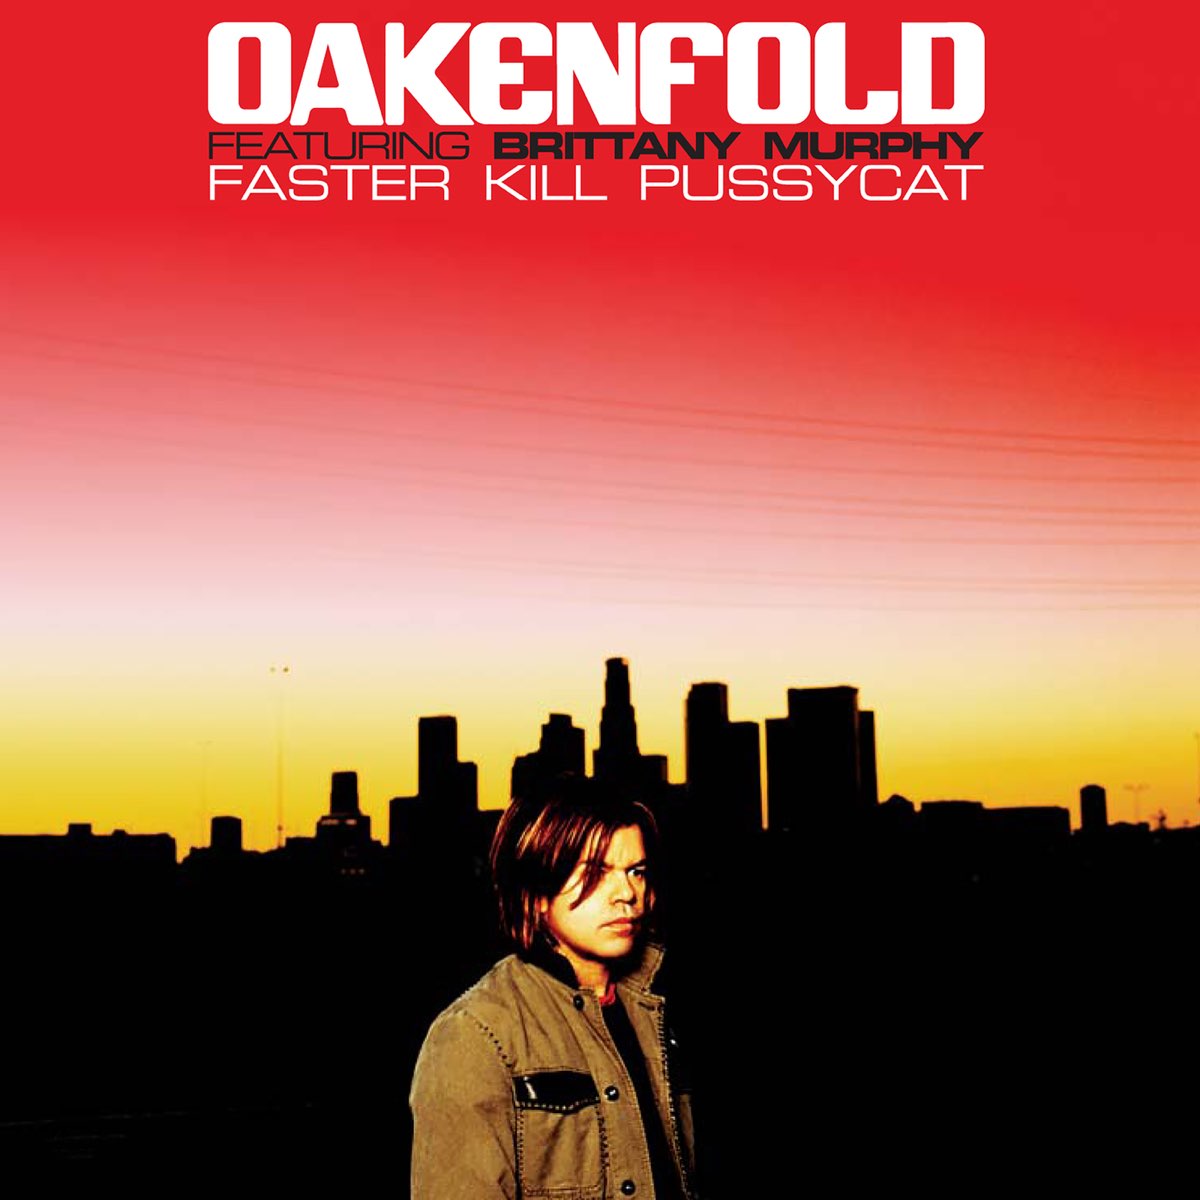 ‎faster Kill Pussycat Feat Brittany Murphy By Oakenfold On Apple Music 9432